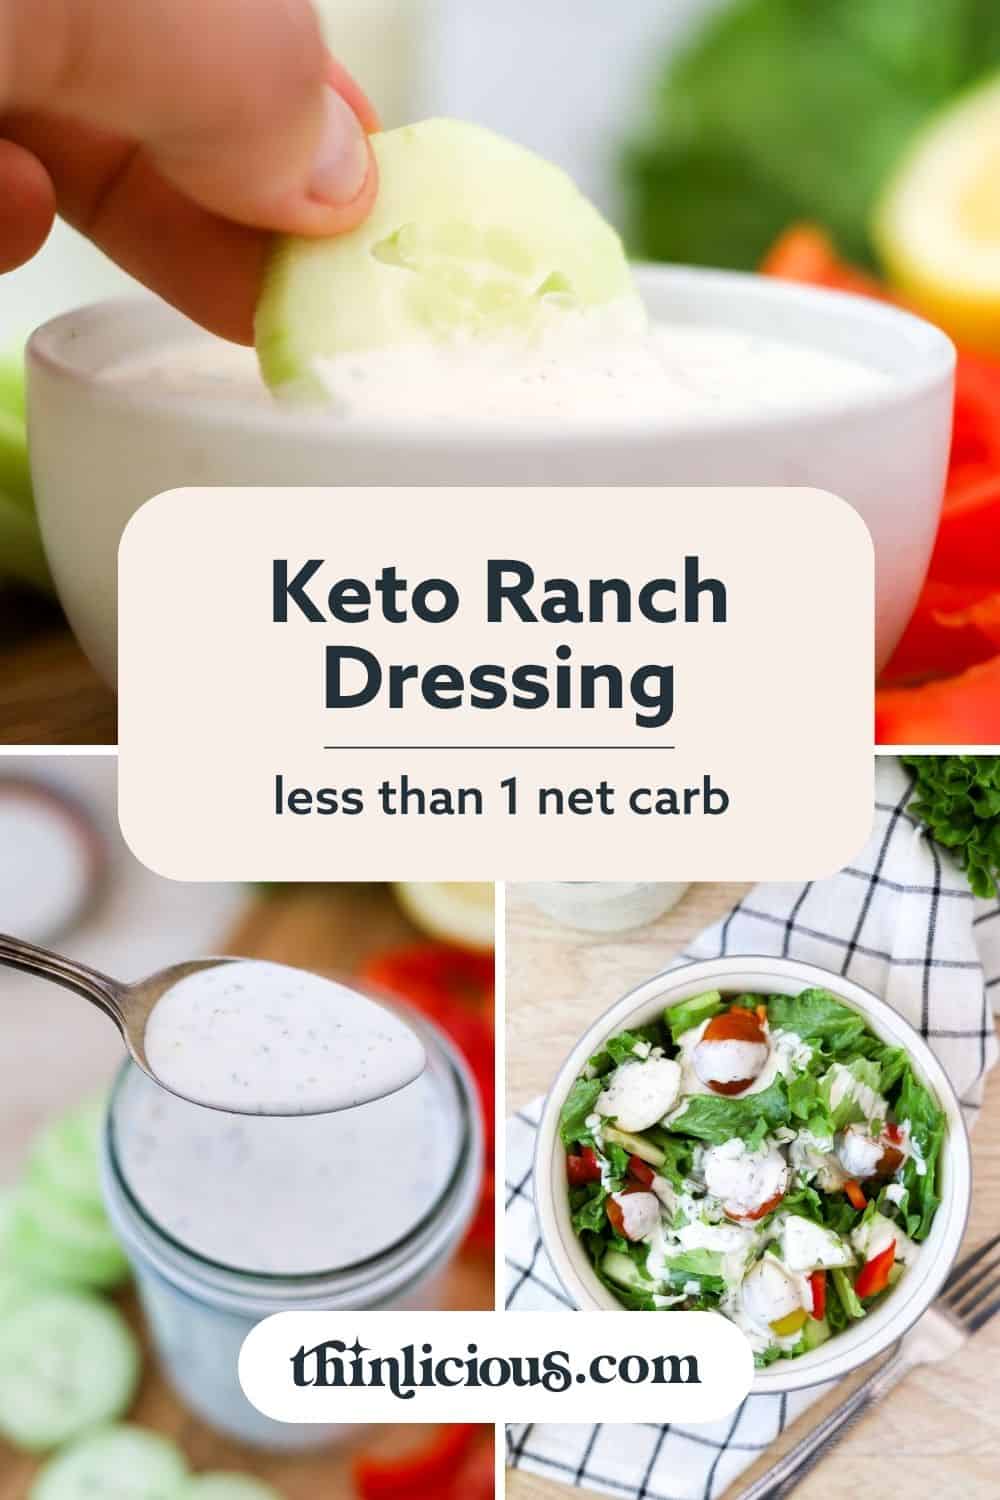 A collage showing keto ranch dressing being made at various stages.